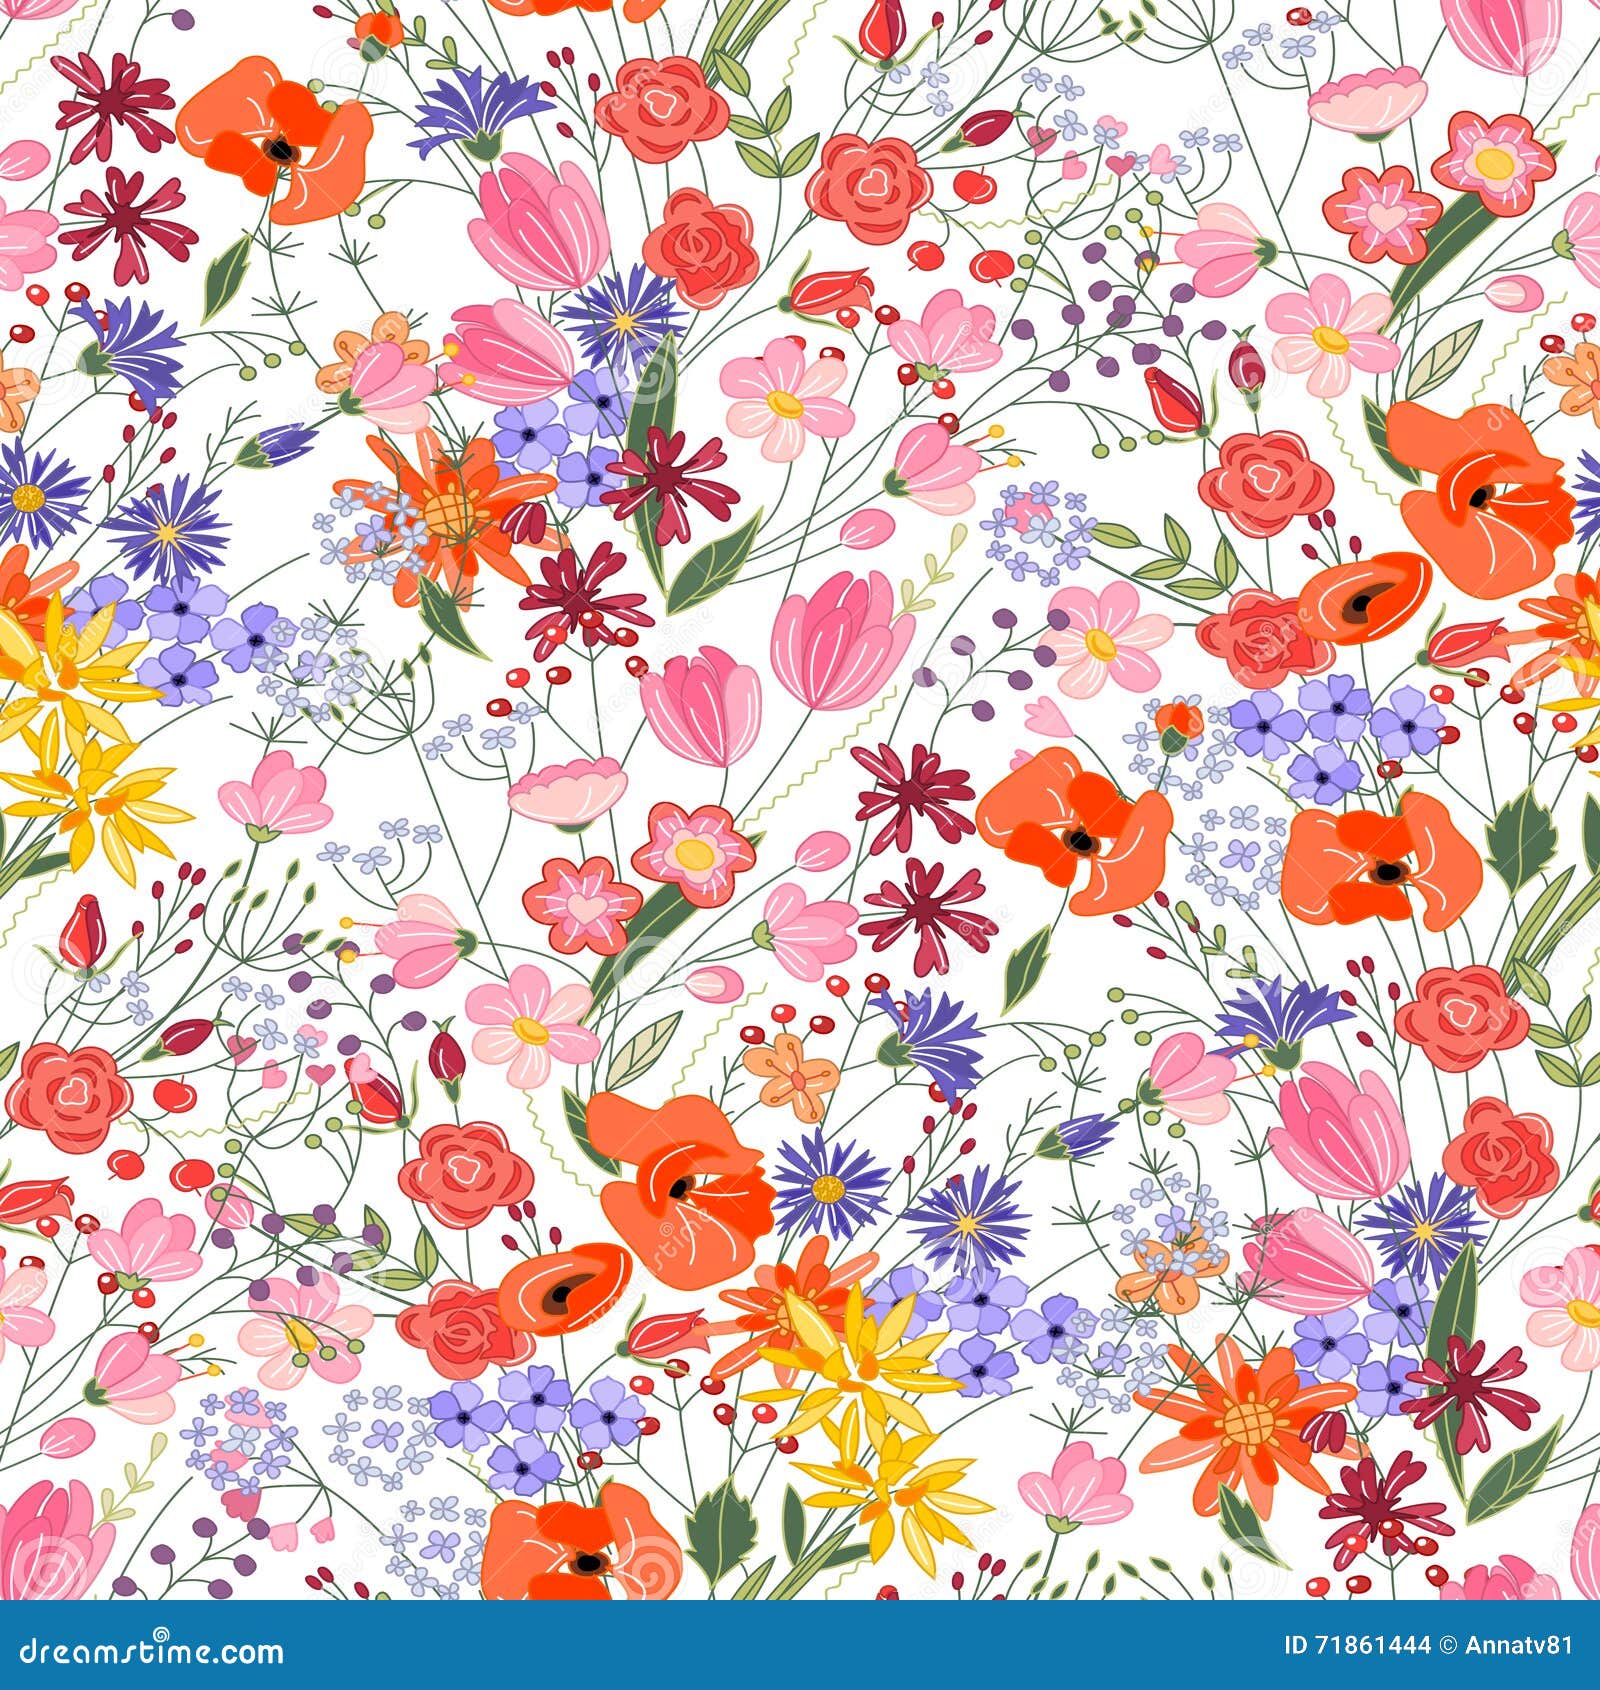 Floral Seamless Pattern with Bright Summer Flowers. Stock Illustration ...